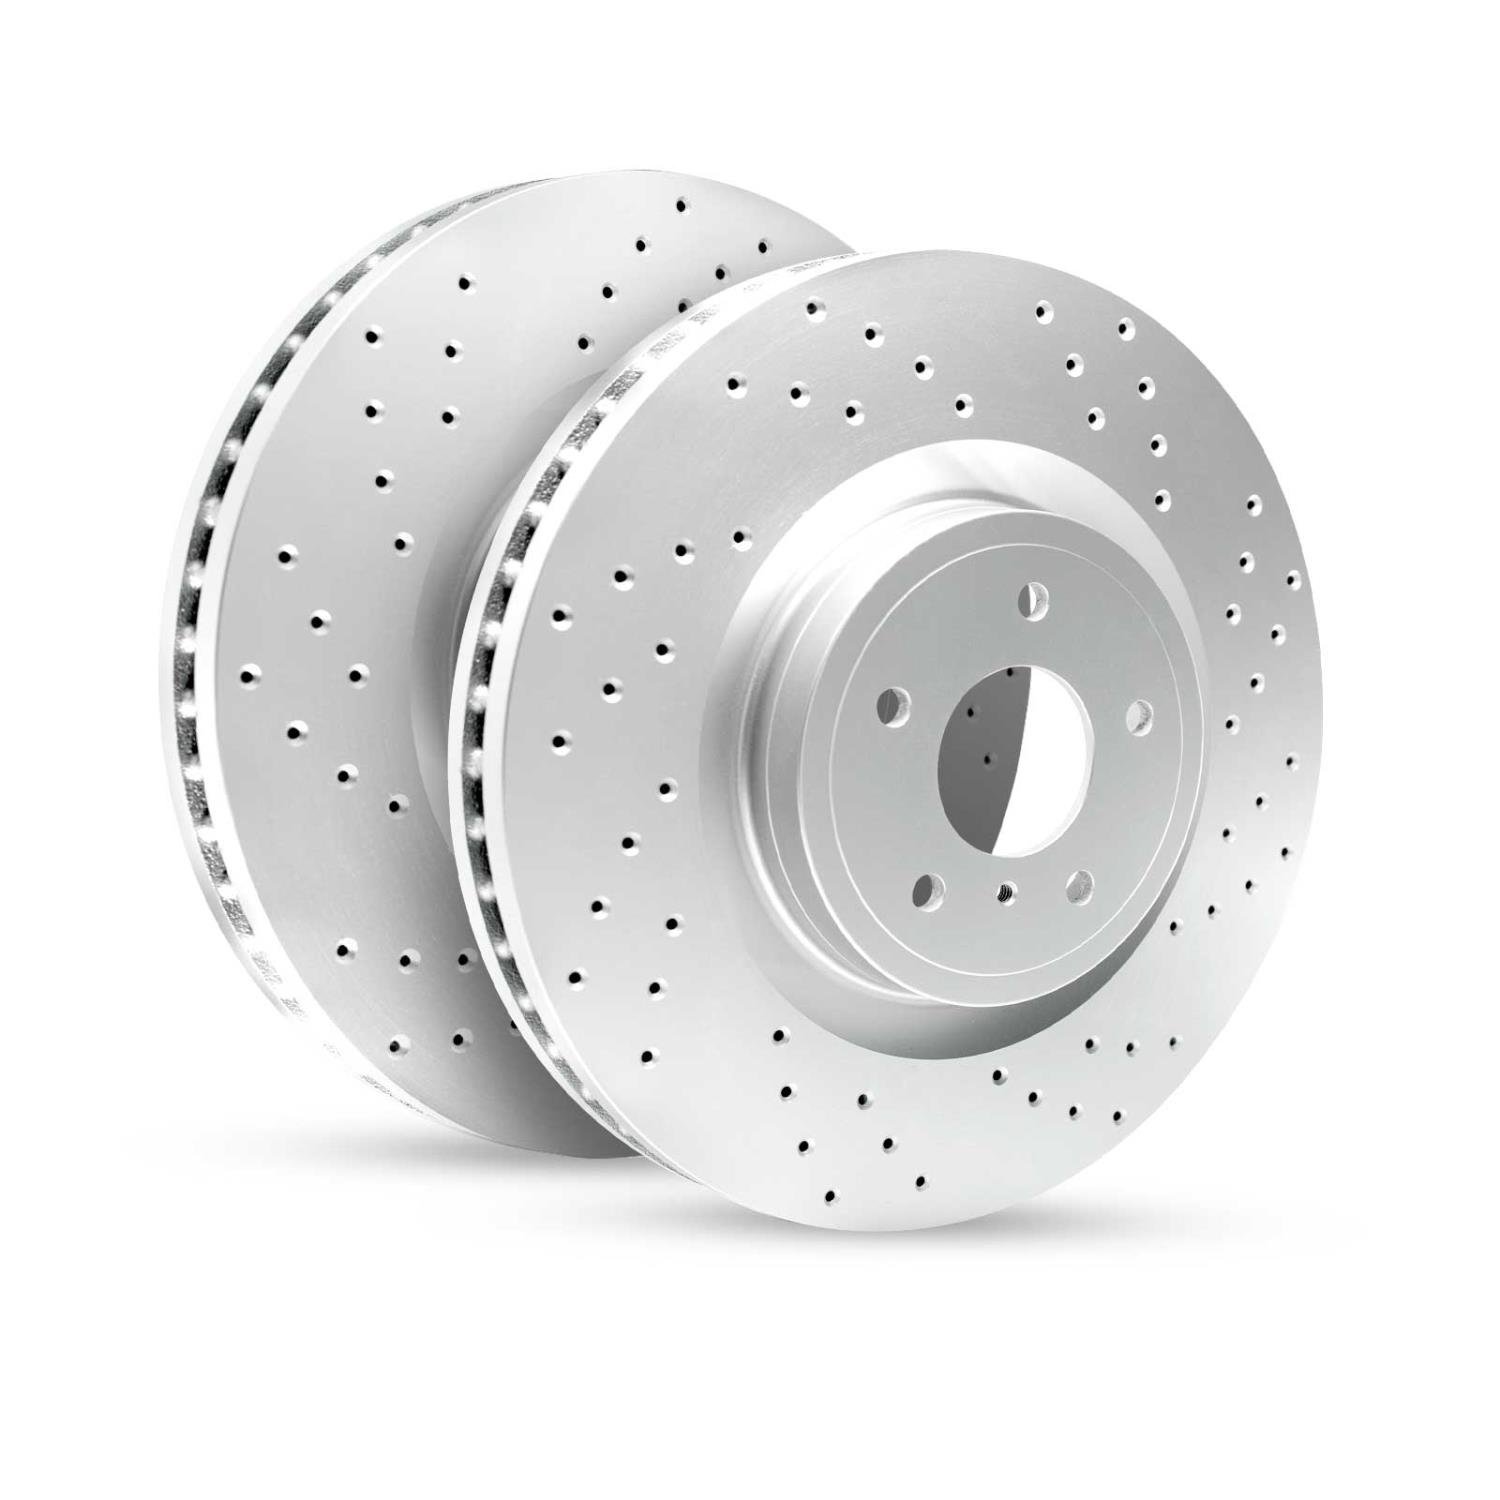 GEO-Carbon Drilled/Slotted Rotors, 2004-2015 Infiniti/Nissan, Position: Rear